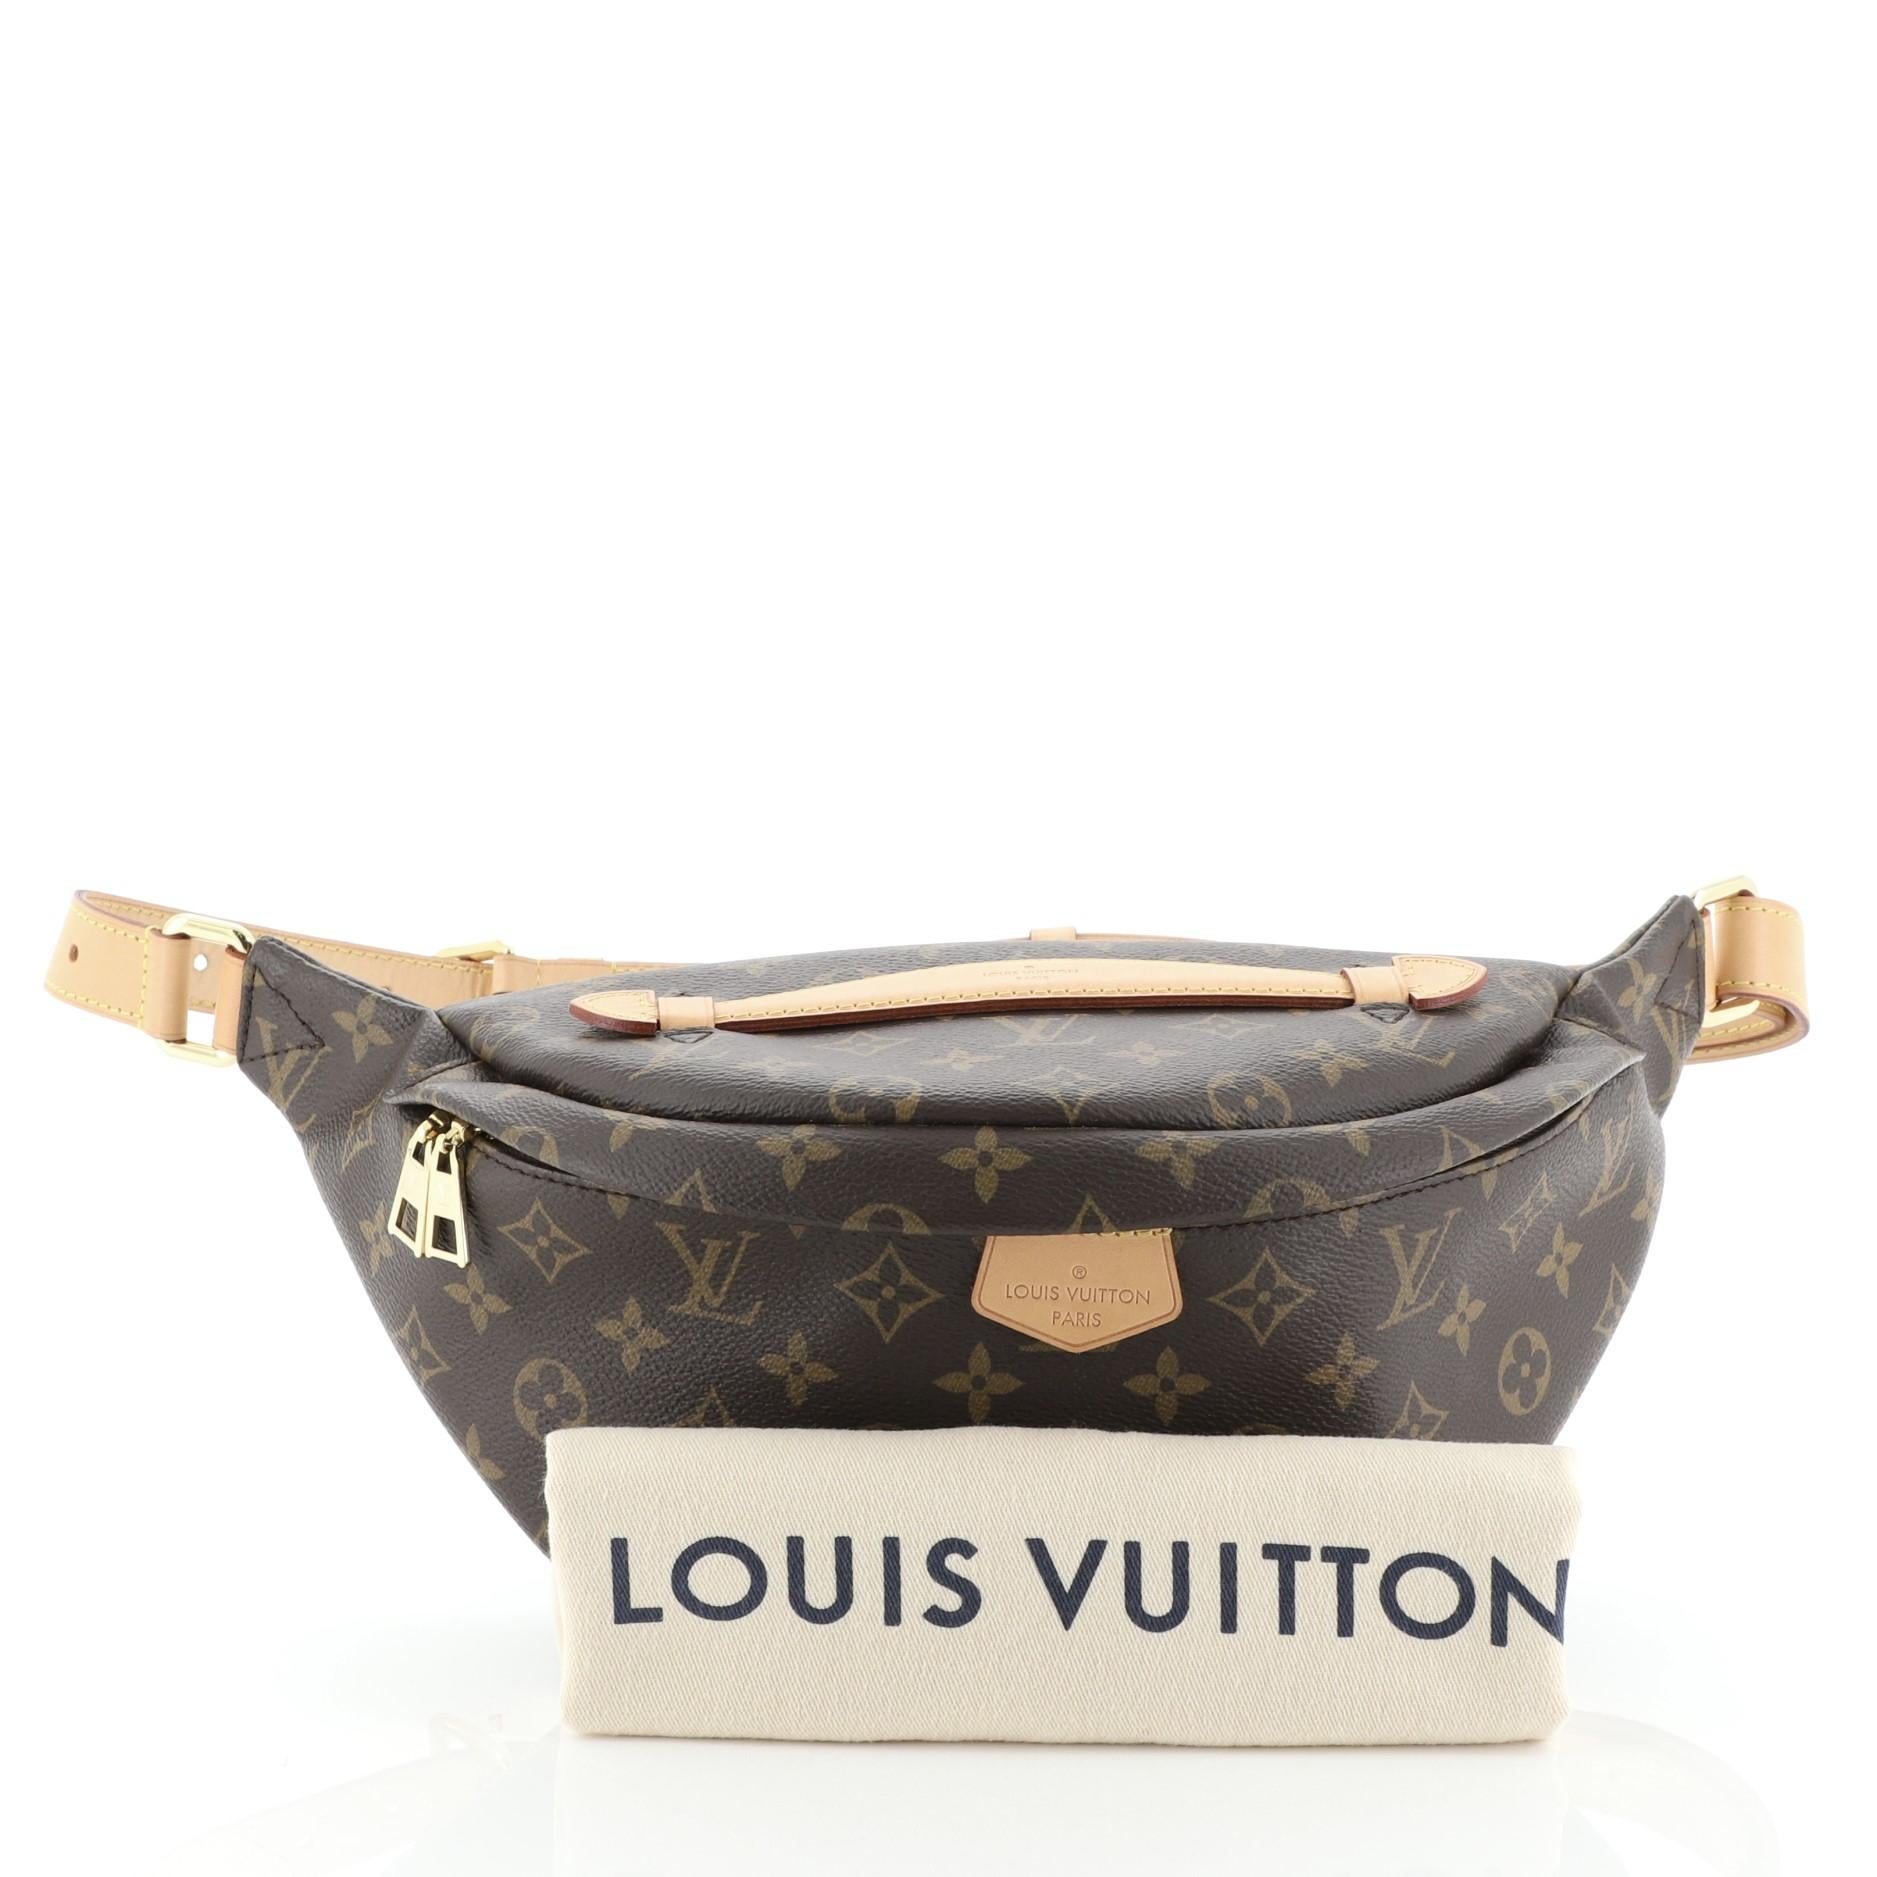 This Louis Vuitton Bum Bag Monogram Canvas, crafted from brown monogram coated canvas, features an adjustable strap, leather top handle, exterior back zip pocket, and gold-tone hardware. Its zip closure opens to a black fabric interior with slip